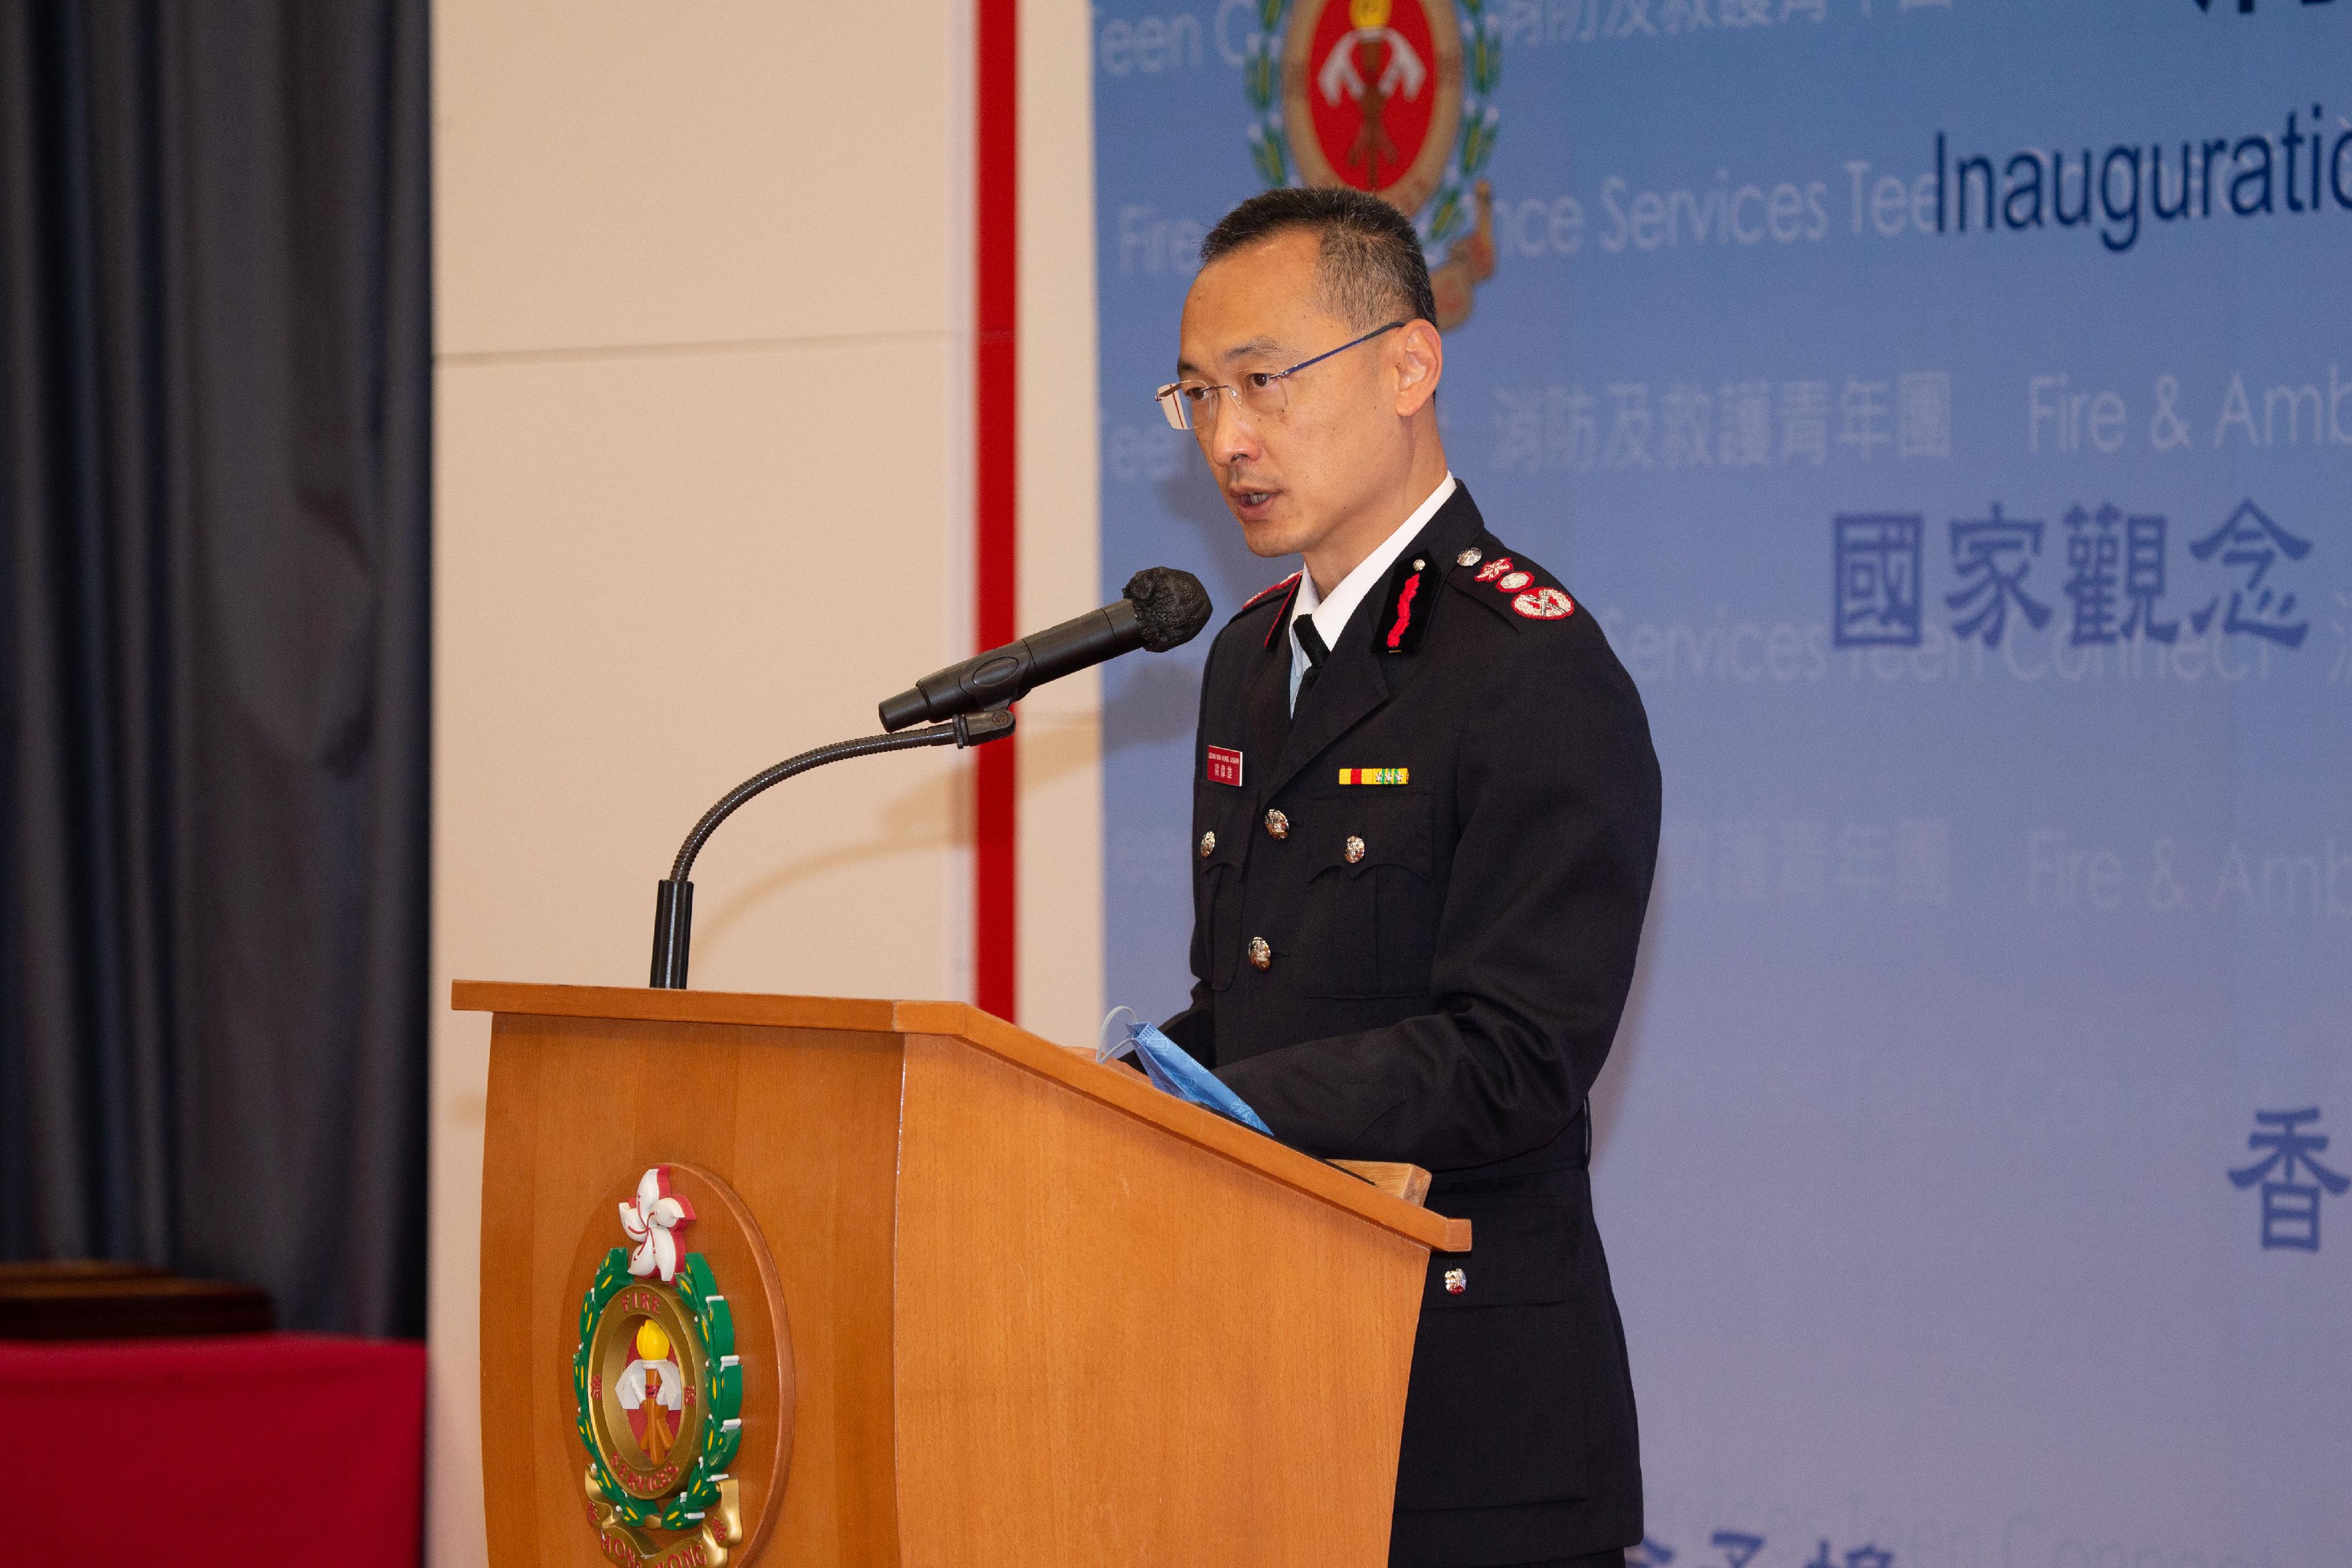 The Fire Services Department announced today (December 14) that it has established the Fire and Ambulance Services Teen Connect with an aim to provide a wide range of practical training programmes for youth. Photo shows the Director of Fire Services, Mr Joseph Leung, delivering a speech at the inauguration ceremony.